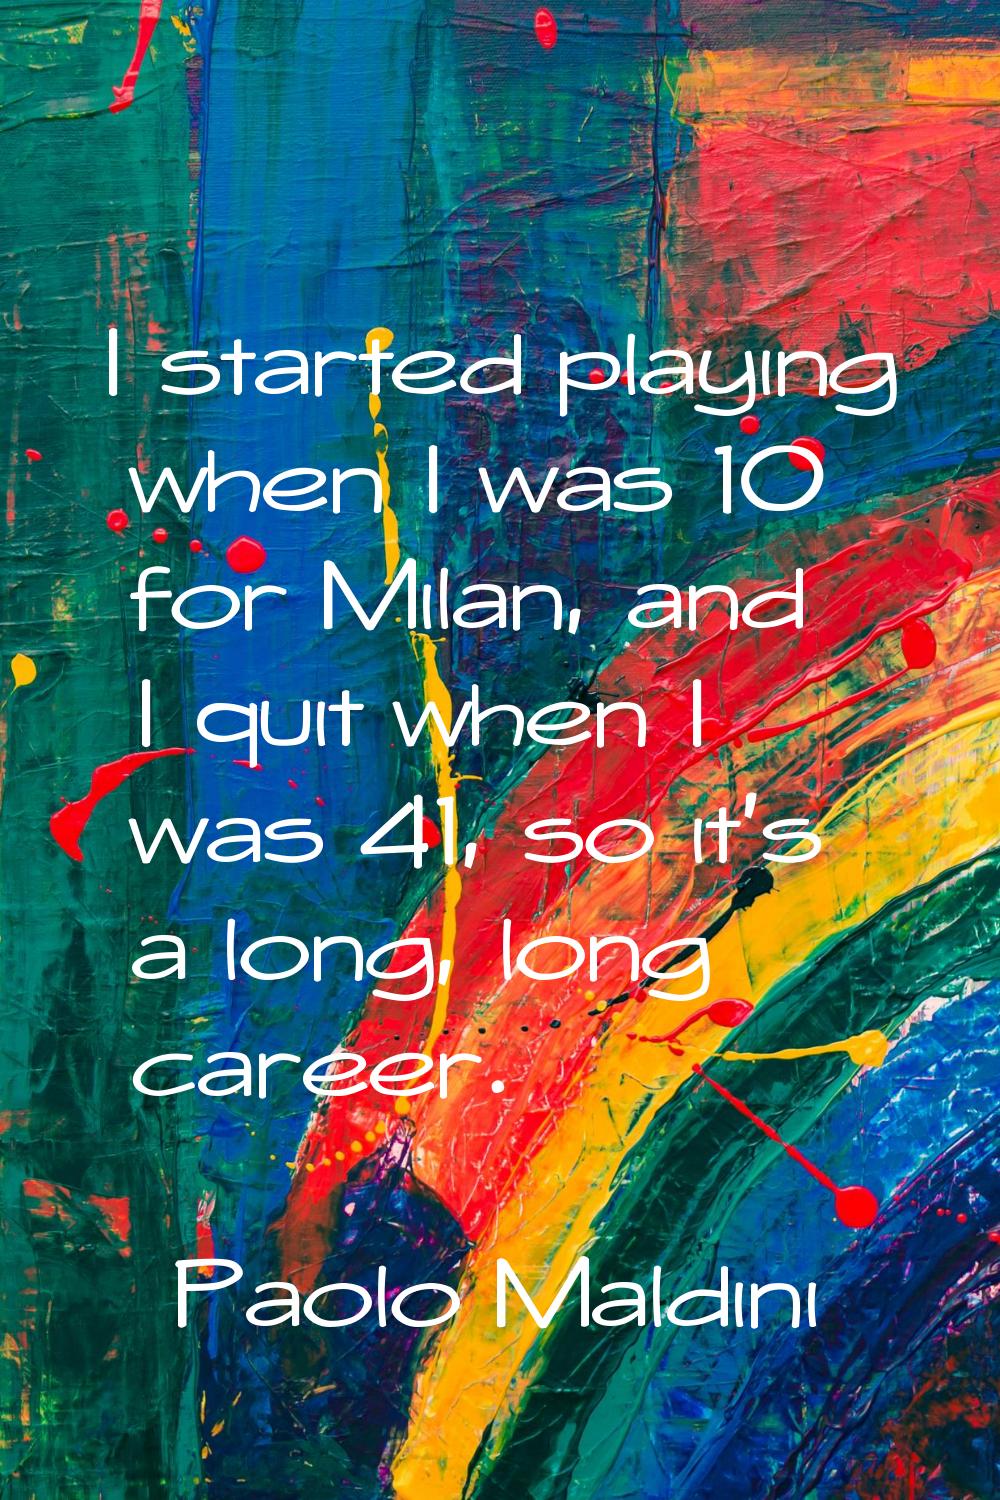 I started playing when I was 10 for Milan, and I quit when I was 41, so it's a long, long career.